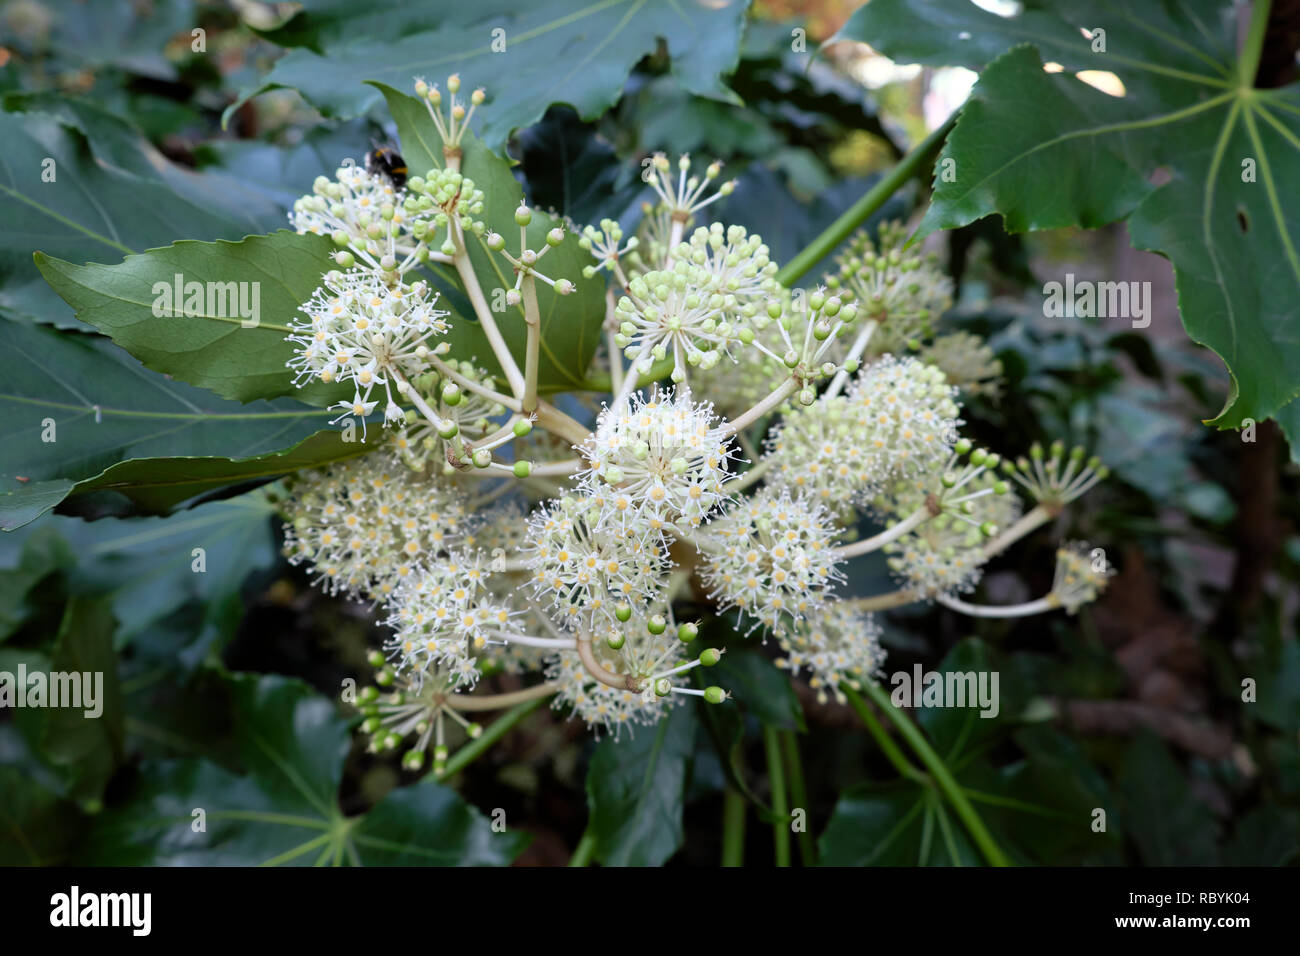 Fatsia Japonica shrub or Japanese paper plant with white flowers flowering in December in London England UK  KATHY DEWITT Stock Photo